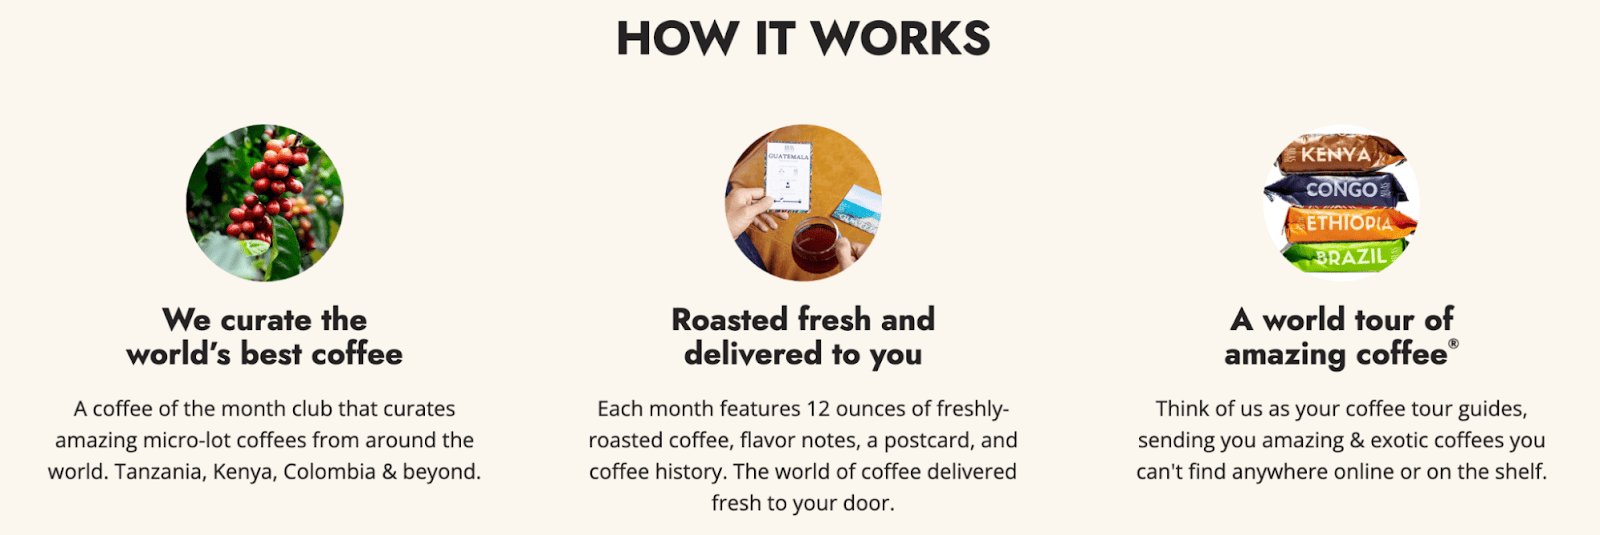 "HOW IT WORKS" section on Atlas Coffee Club’s homepage